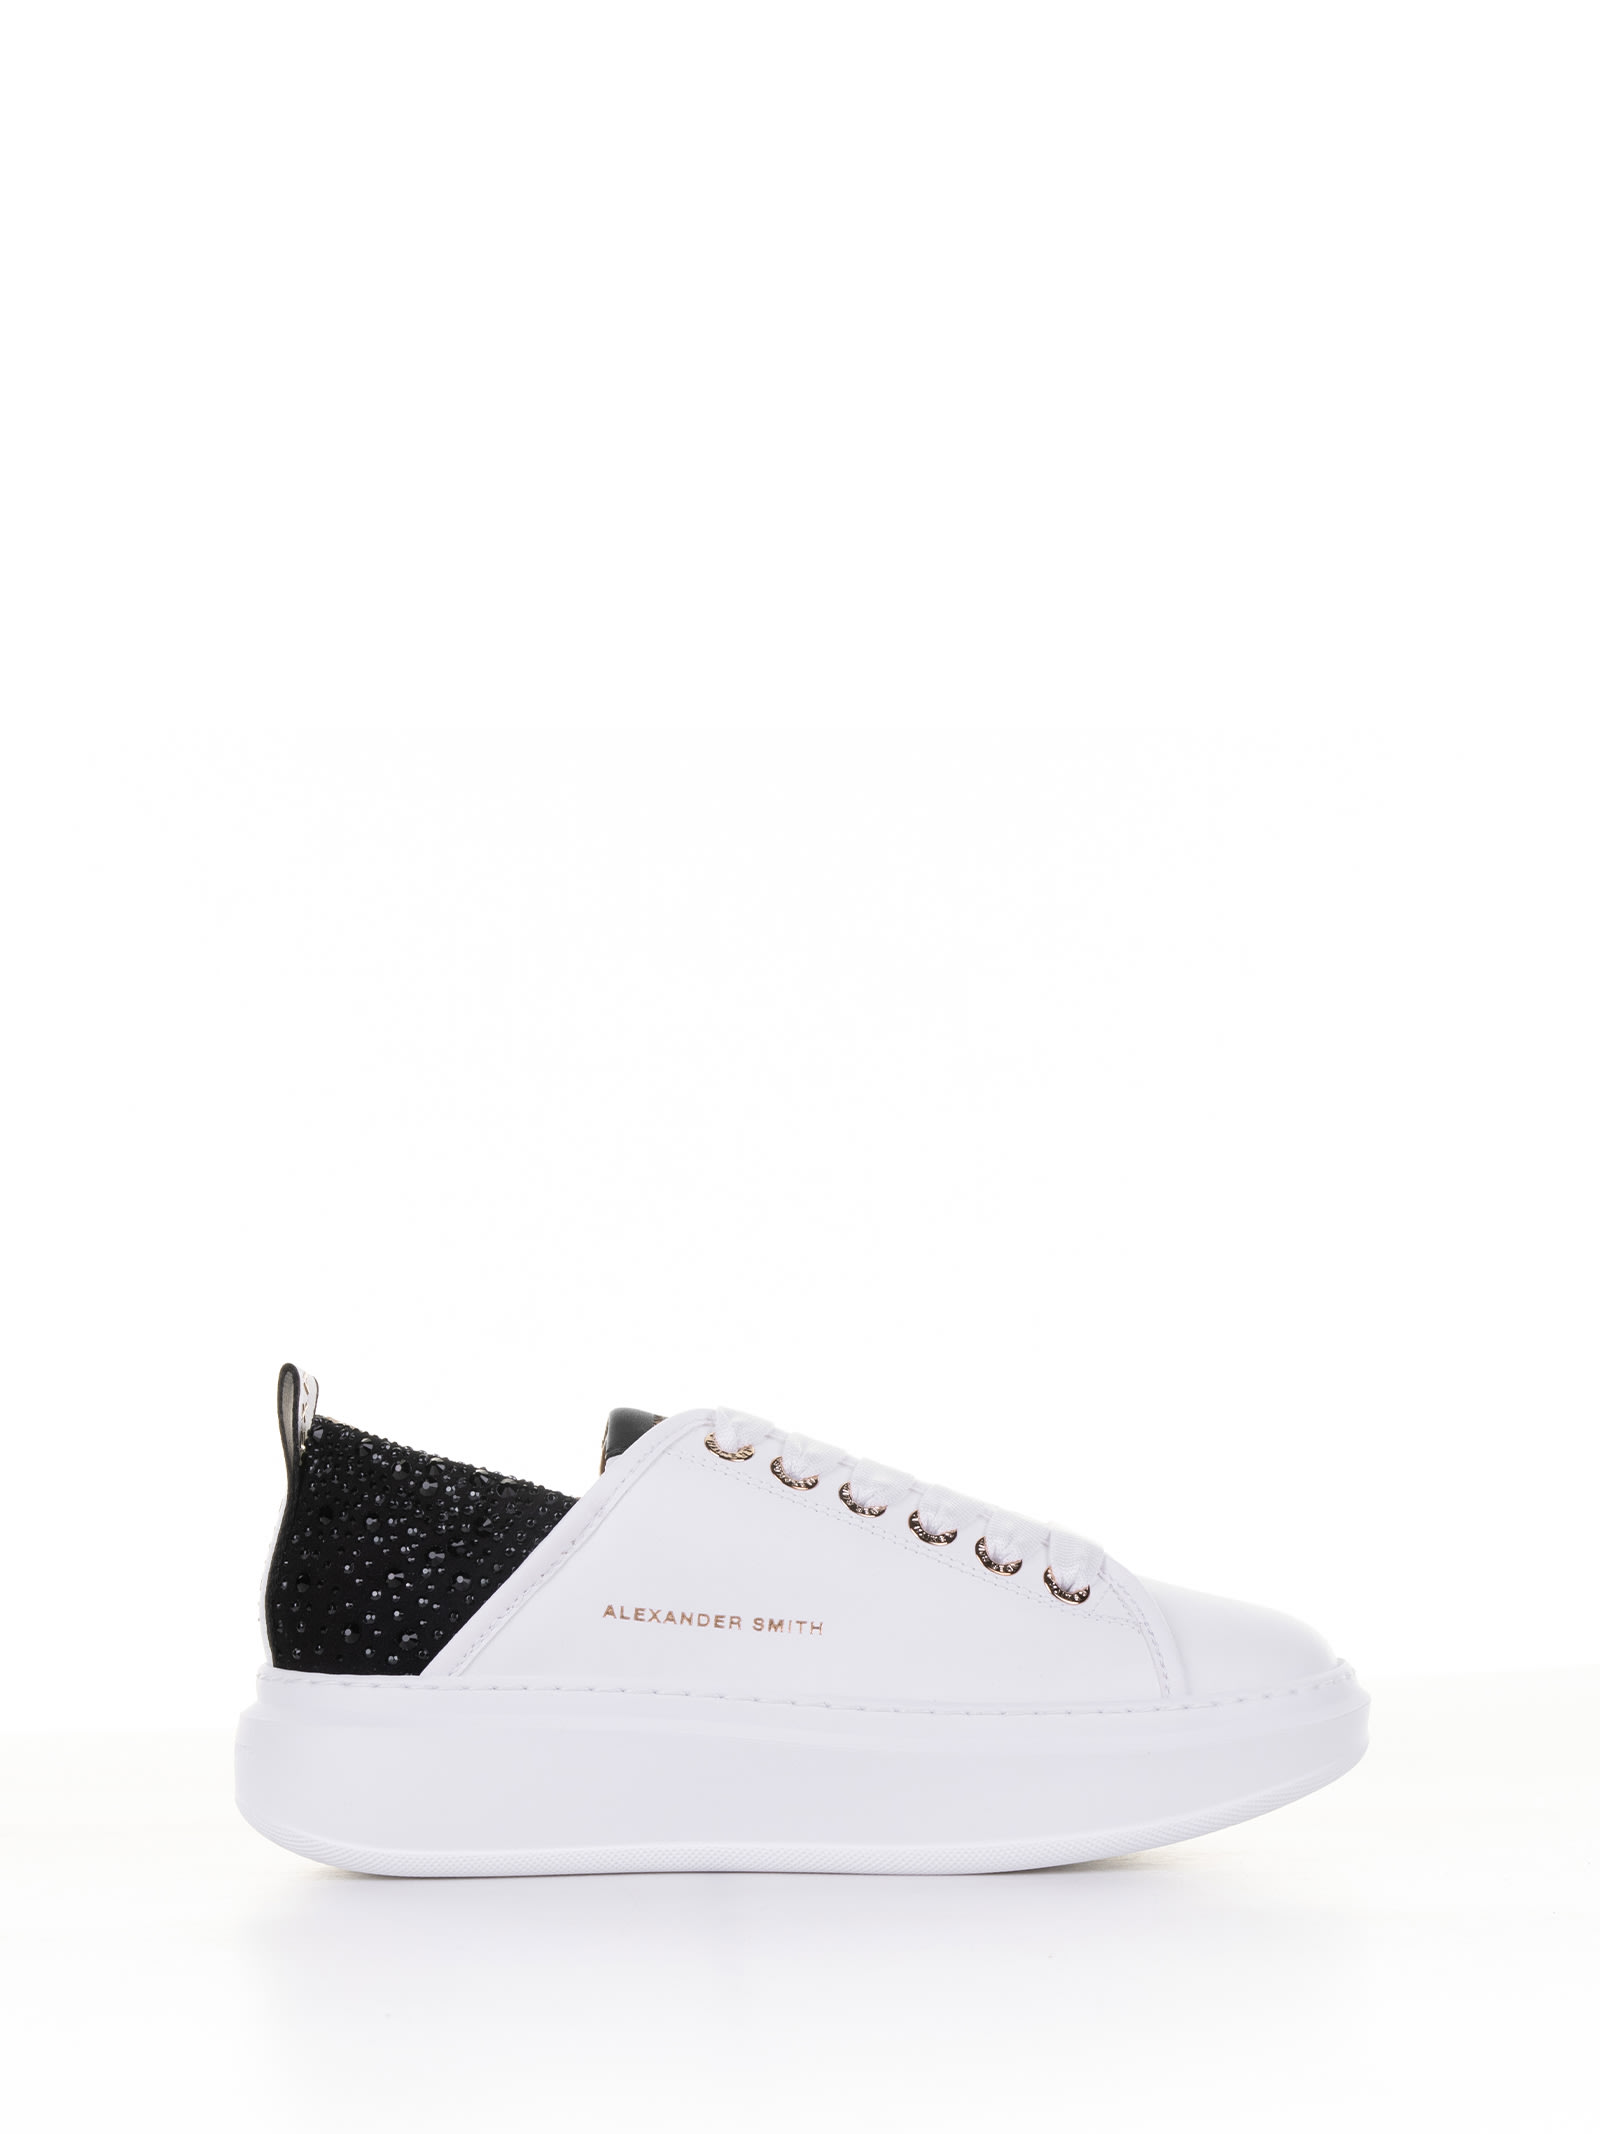 Alexander Smith Wembley Sneaker In Leather And Rhinestones In White Black